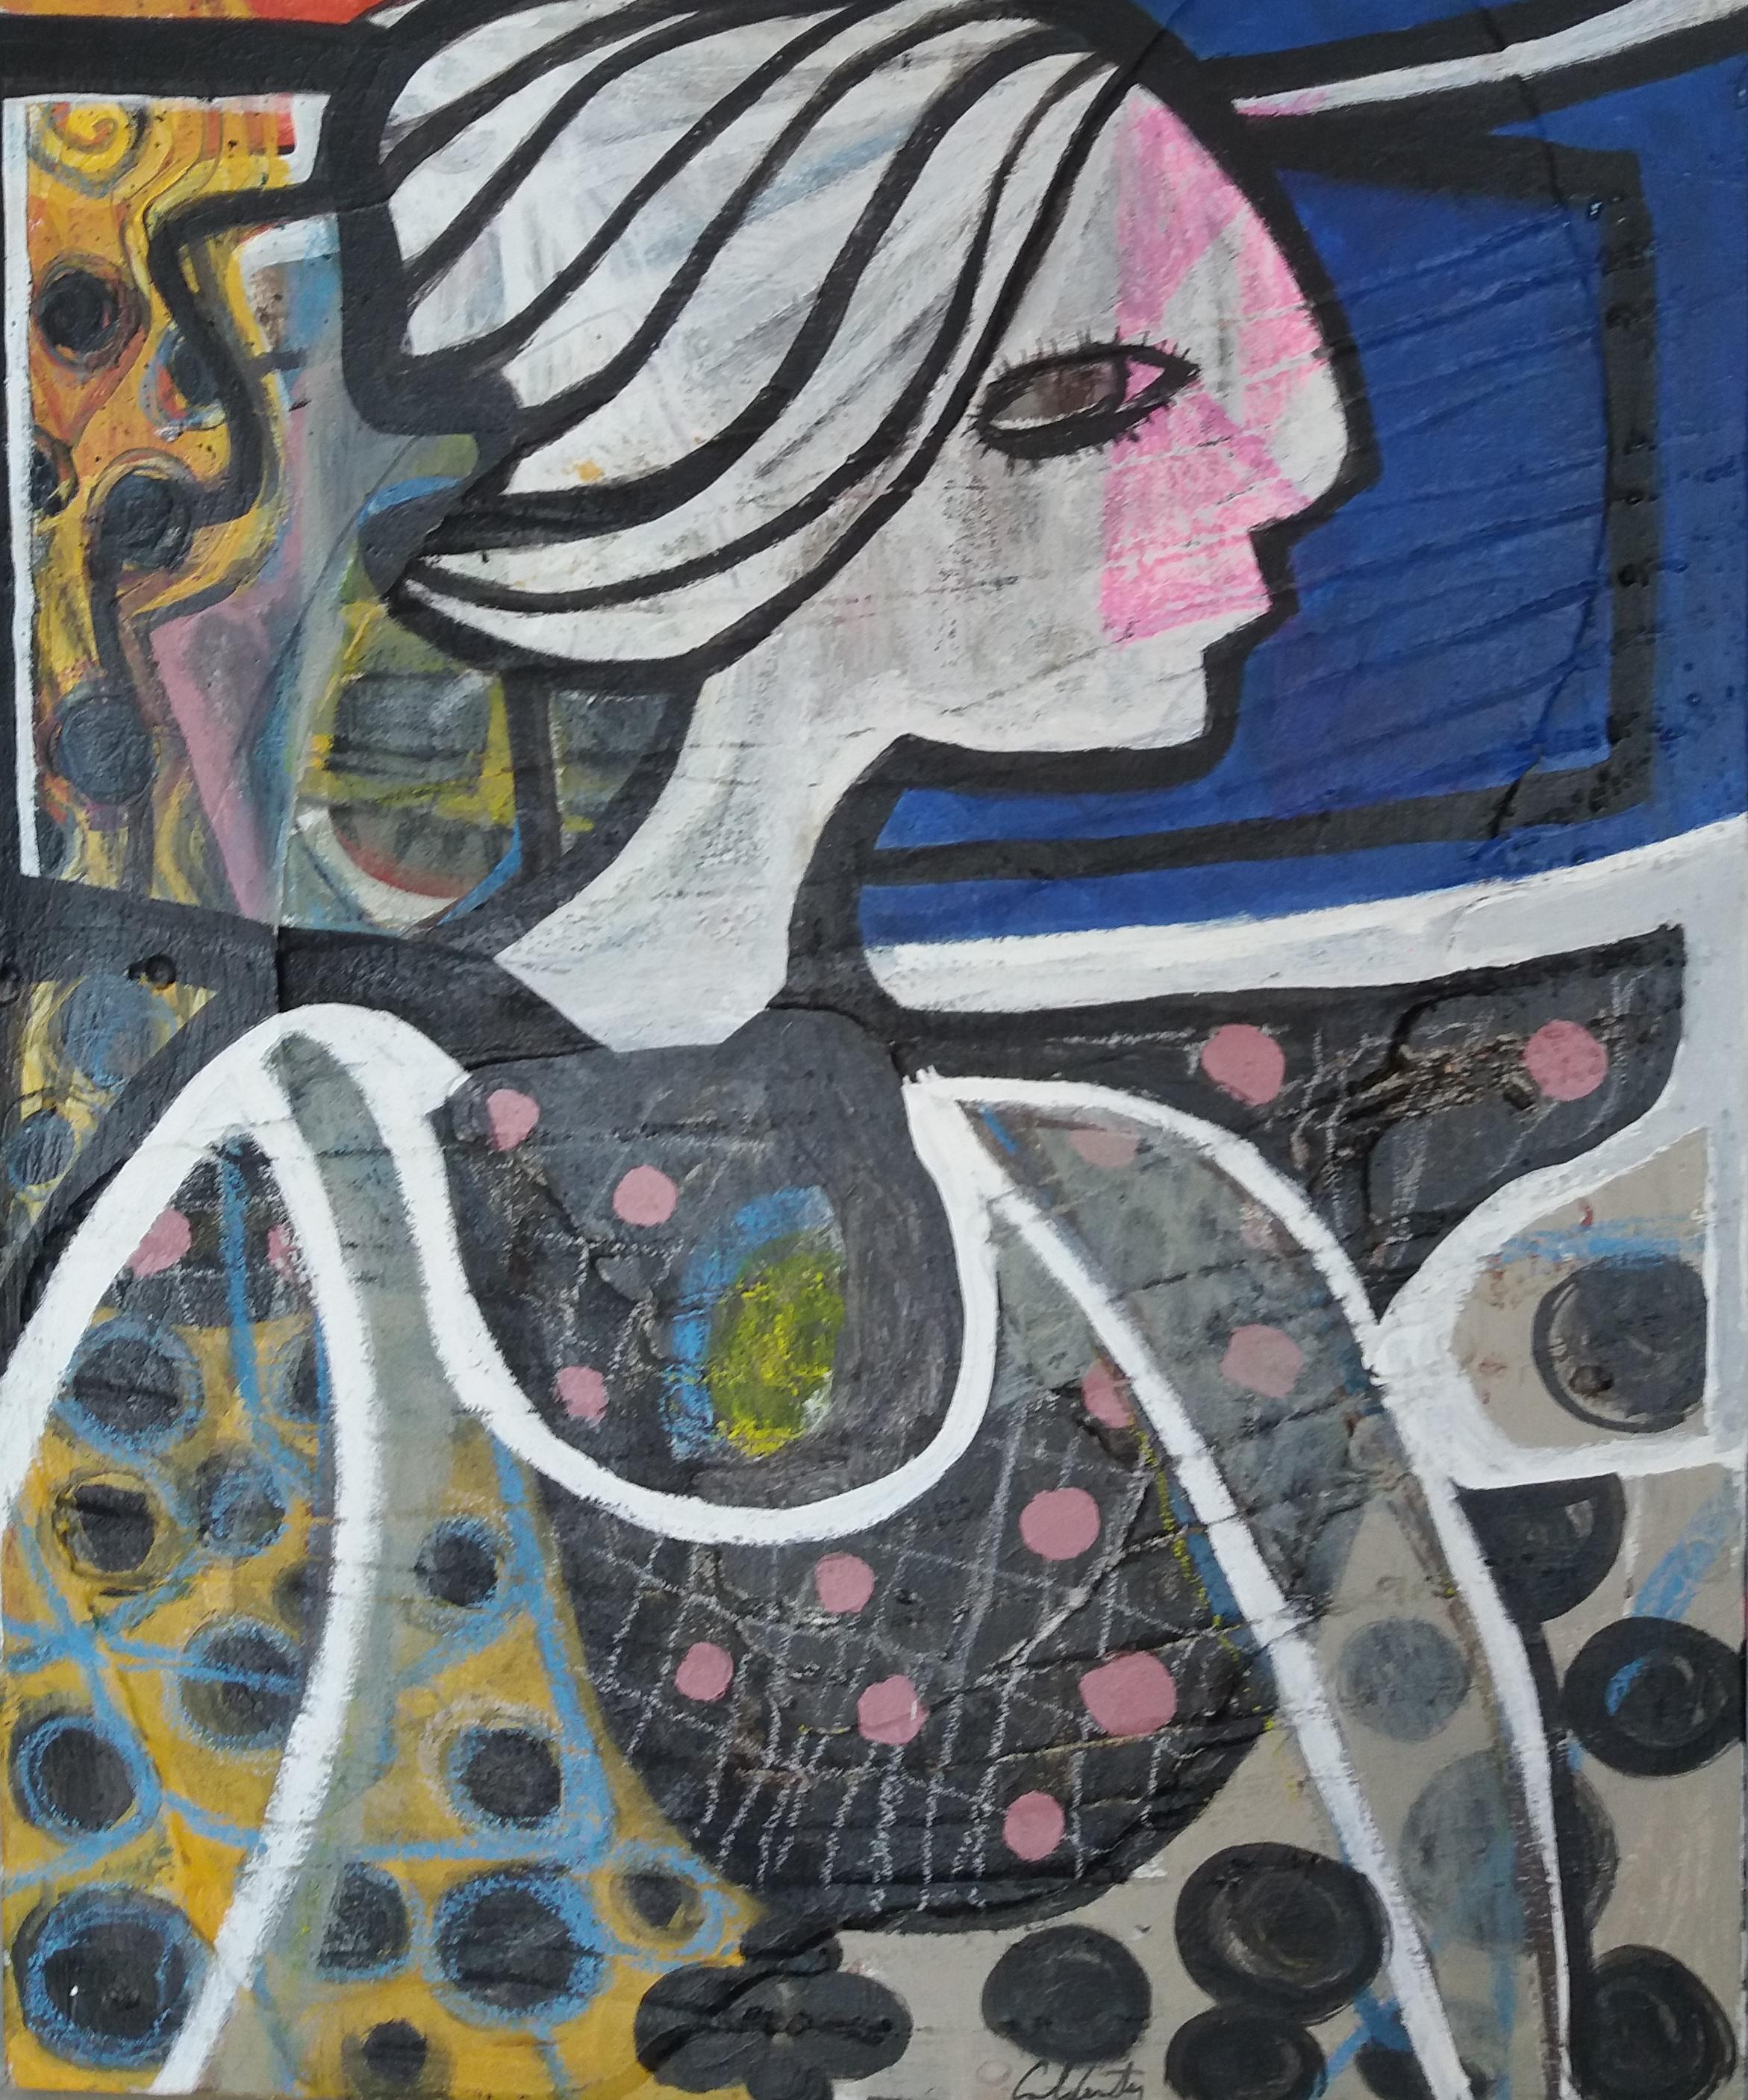 Woman Lina- Original Neo-expressionist Mixed media painting - Painting by Toni CALDENTEY